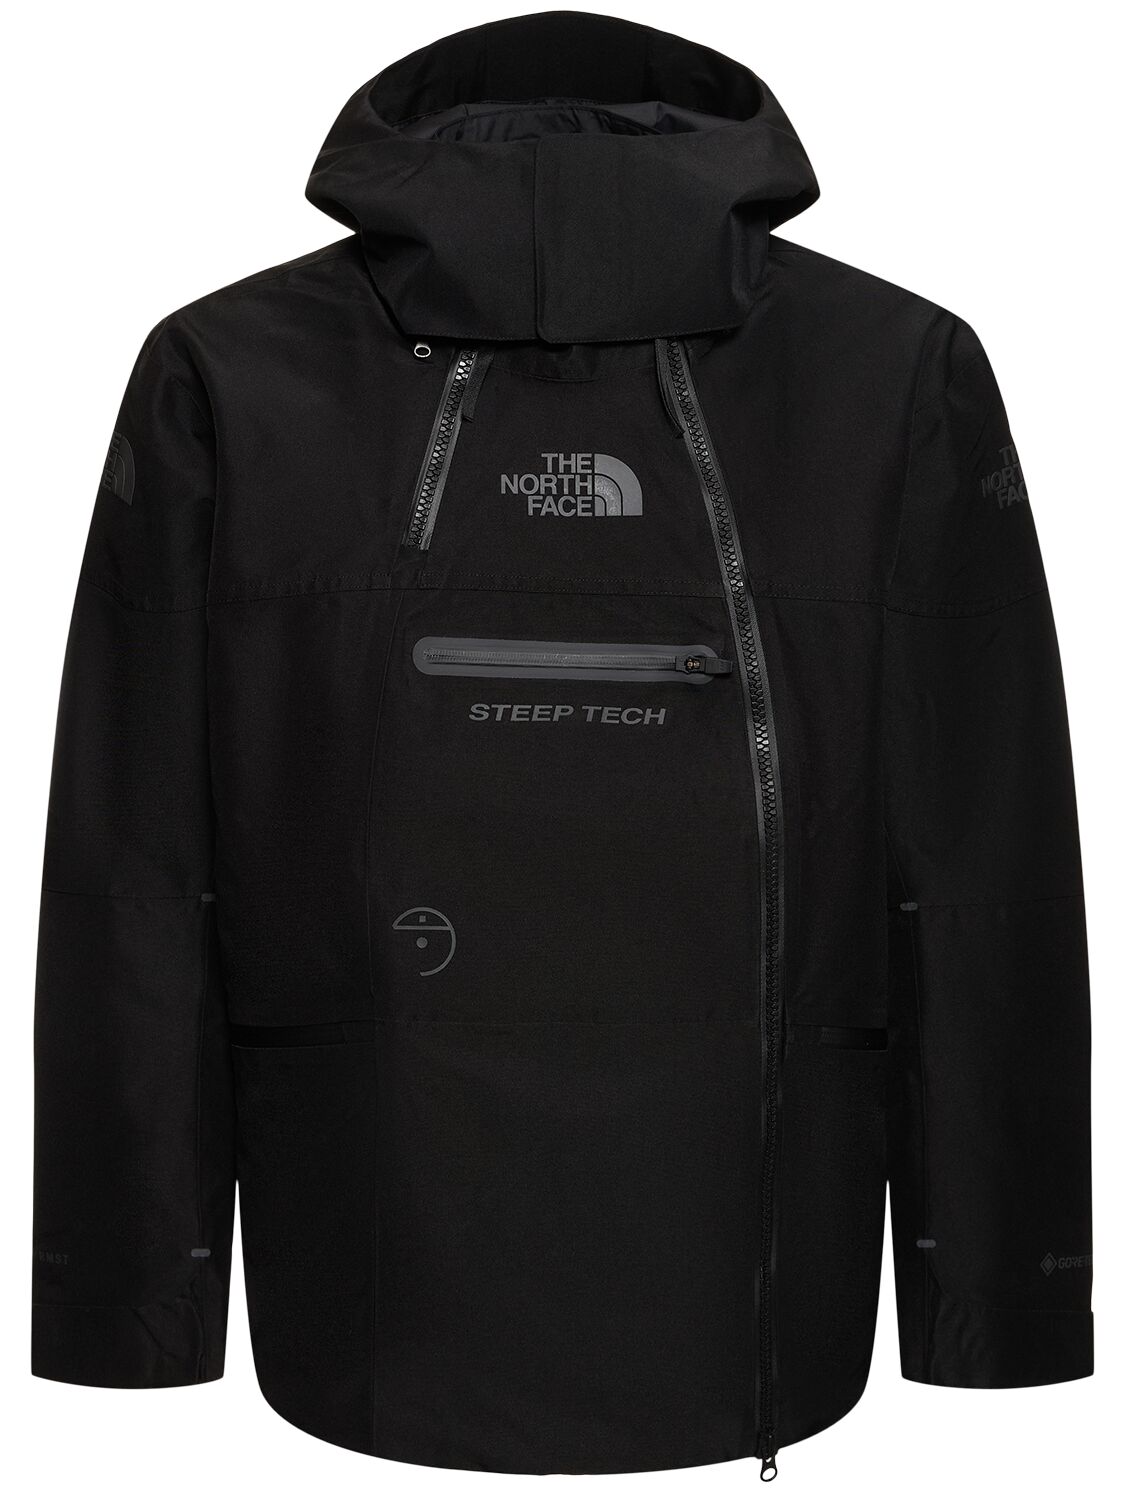 THE NORTH FACE STEEP TECH GORE-TEX DOWN WORK JACKET